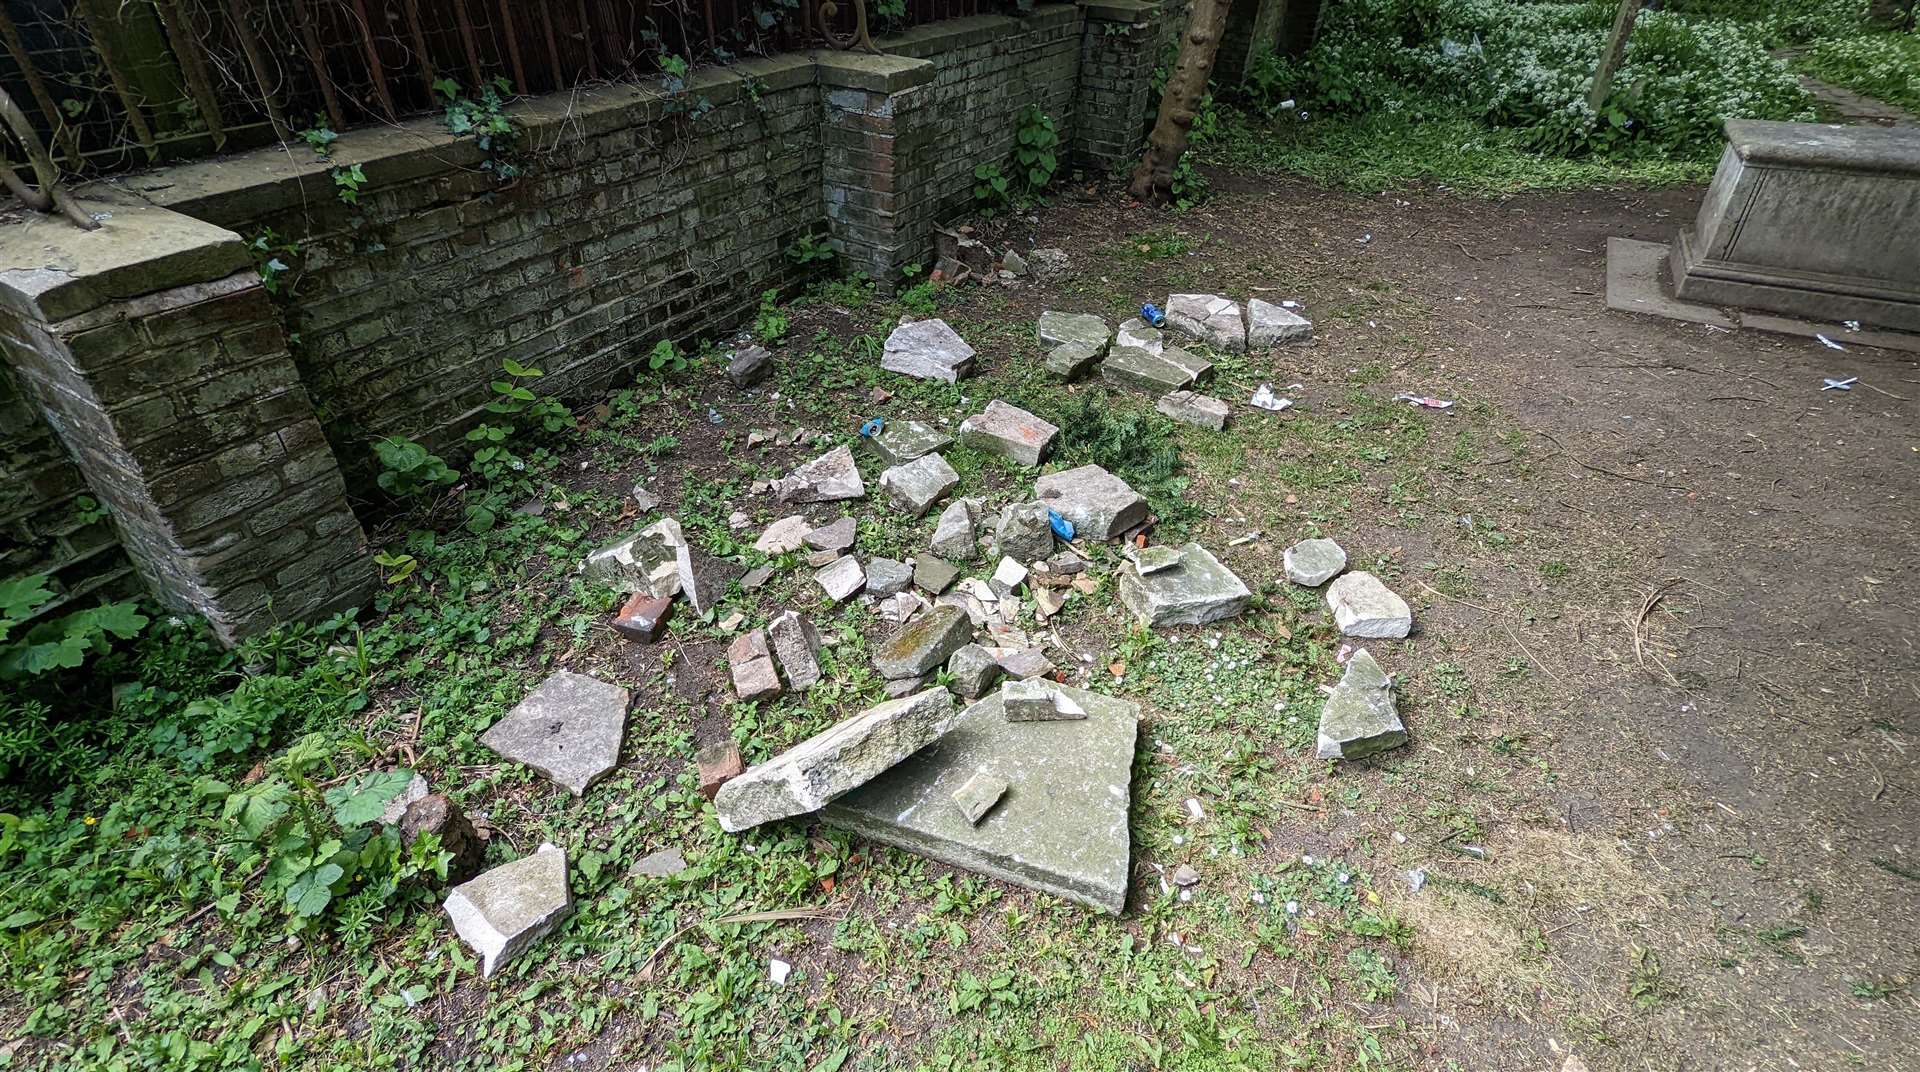 Damage to graves in the churchyard of the Parish Church of St Mary & St Eanswythe in Folkestone